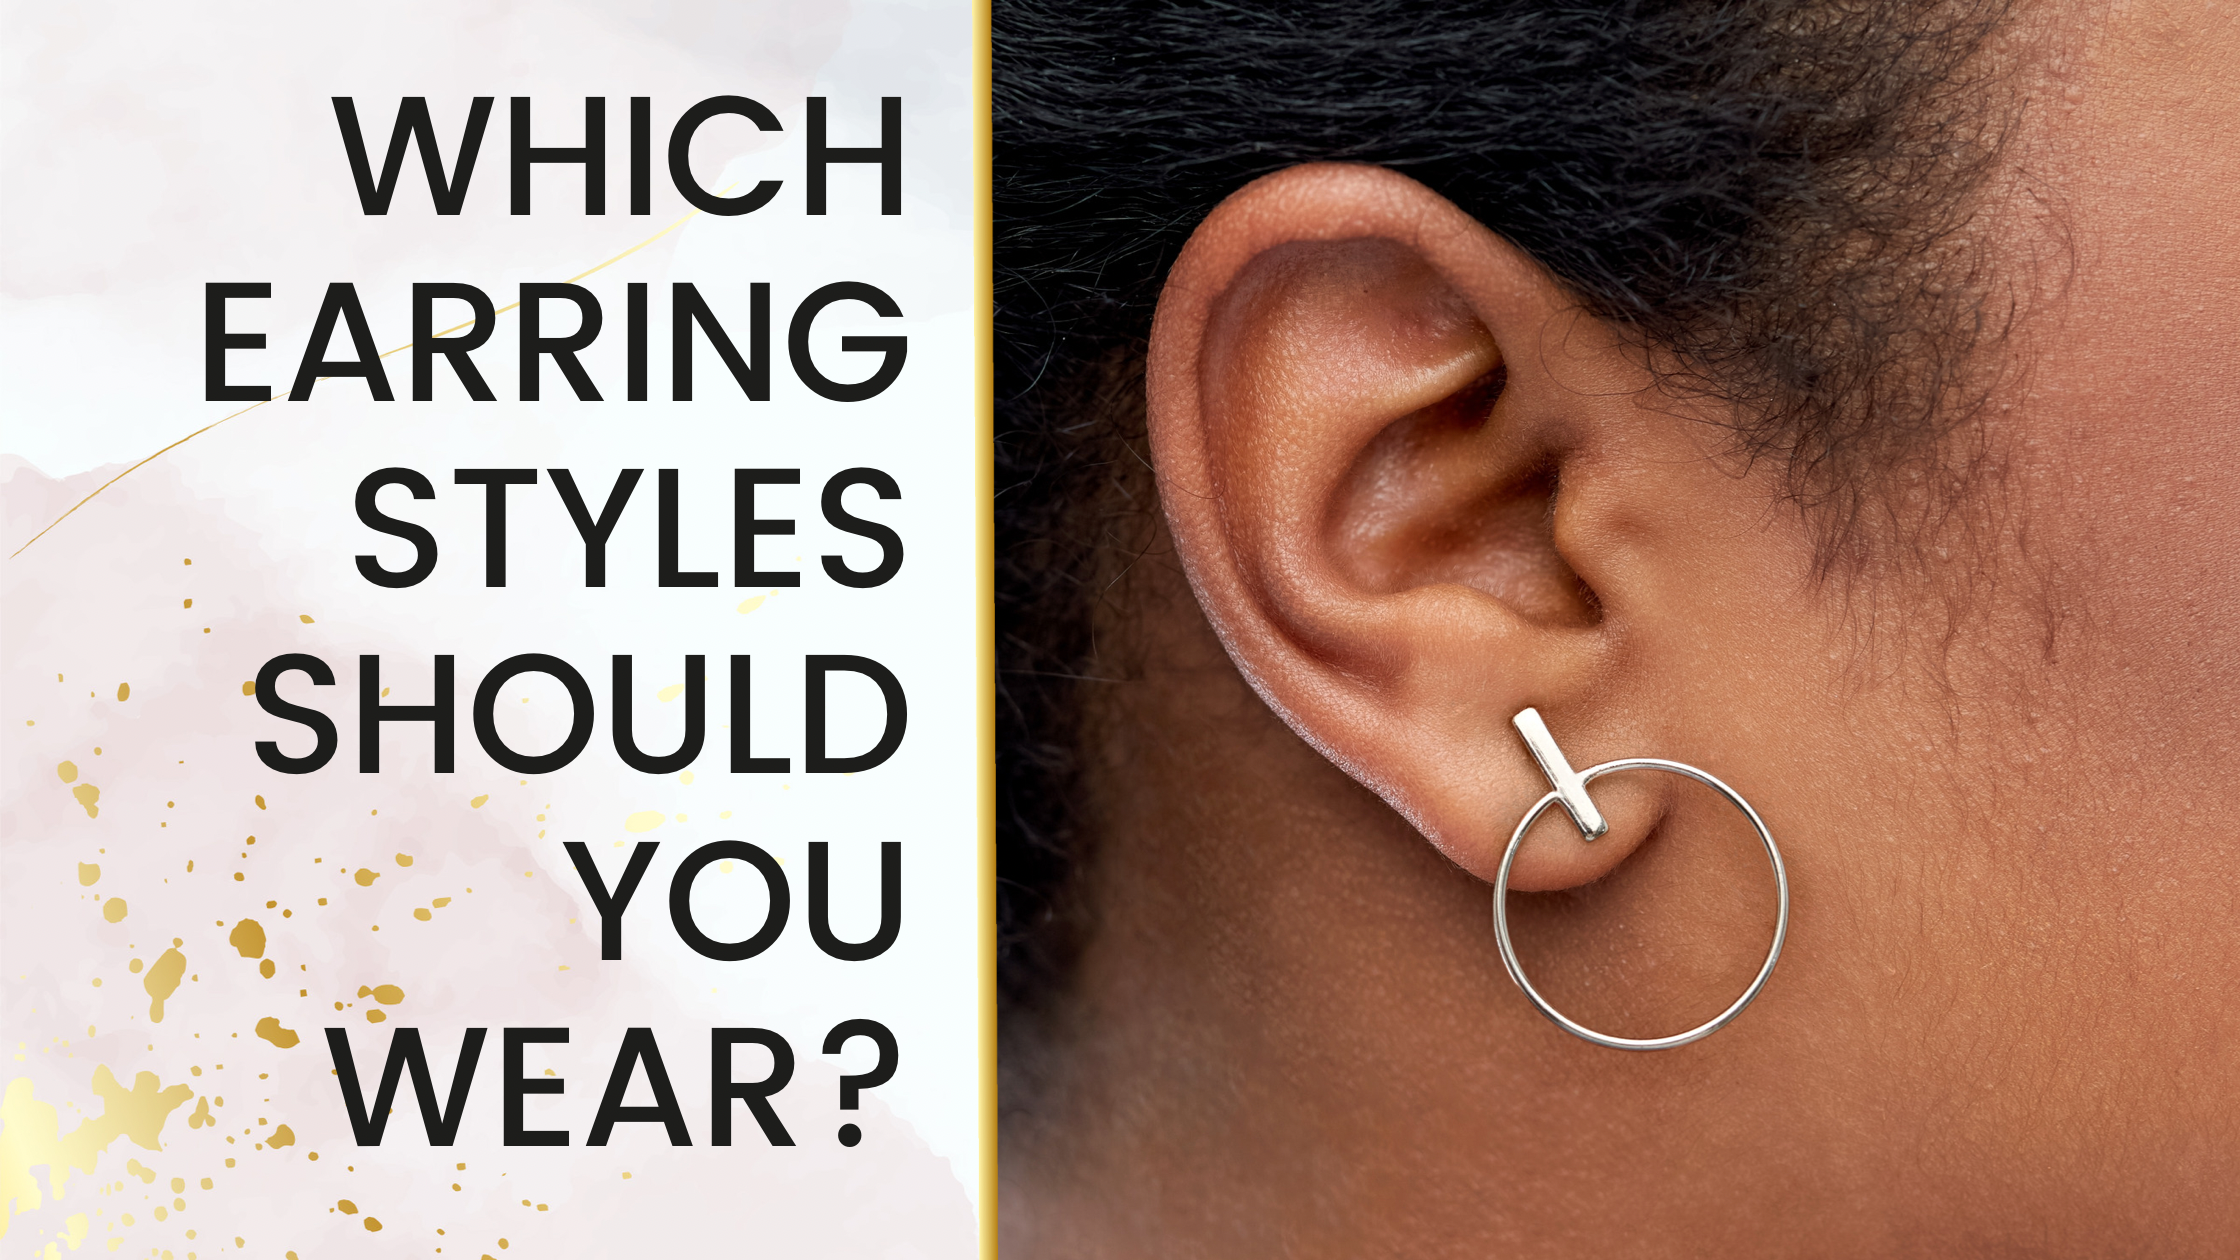 Which Earring Styles You Should Wear Based on Your Face